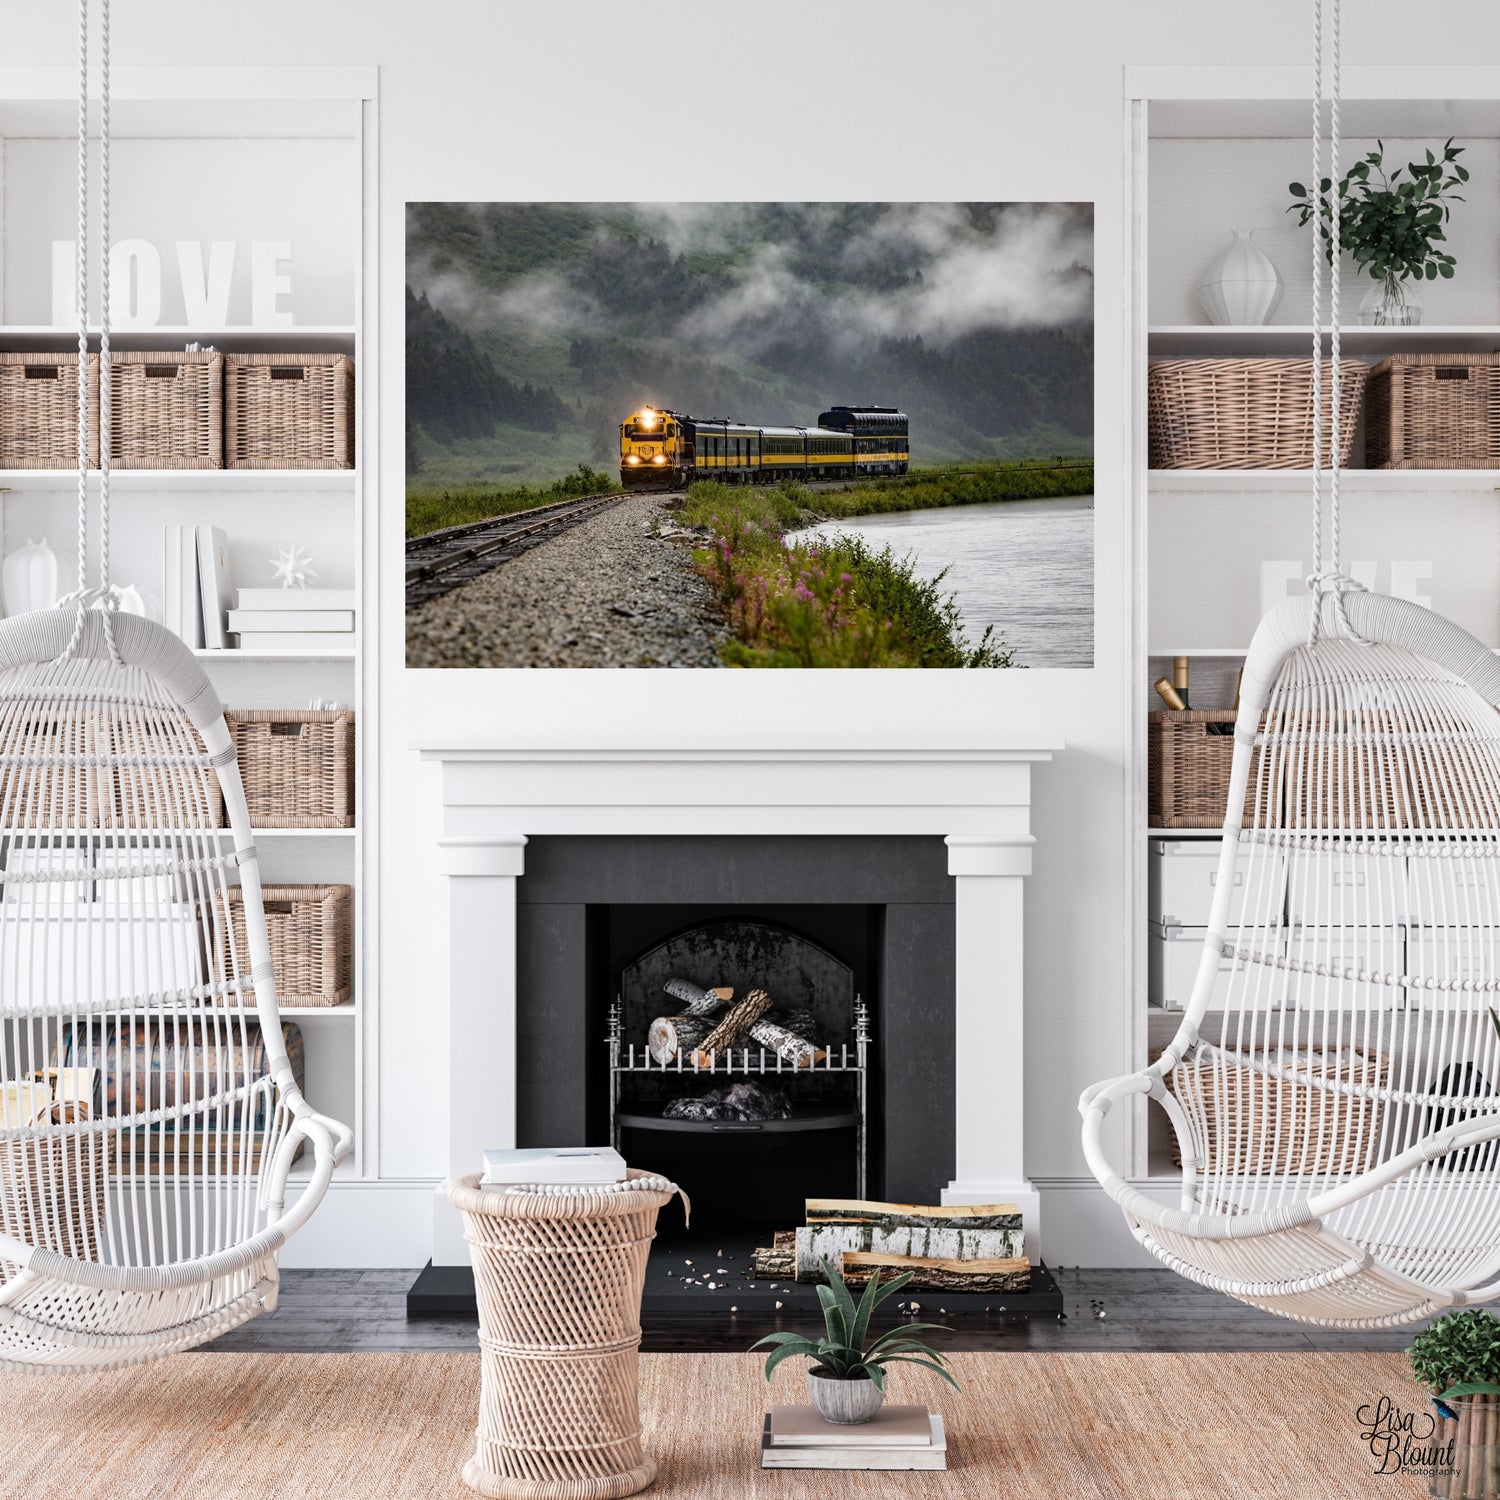 Alaska train large art hanging above fireplace in white living room Lisa Blount photography